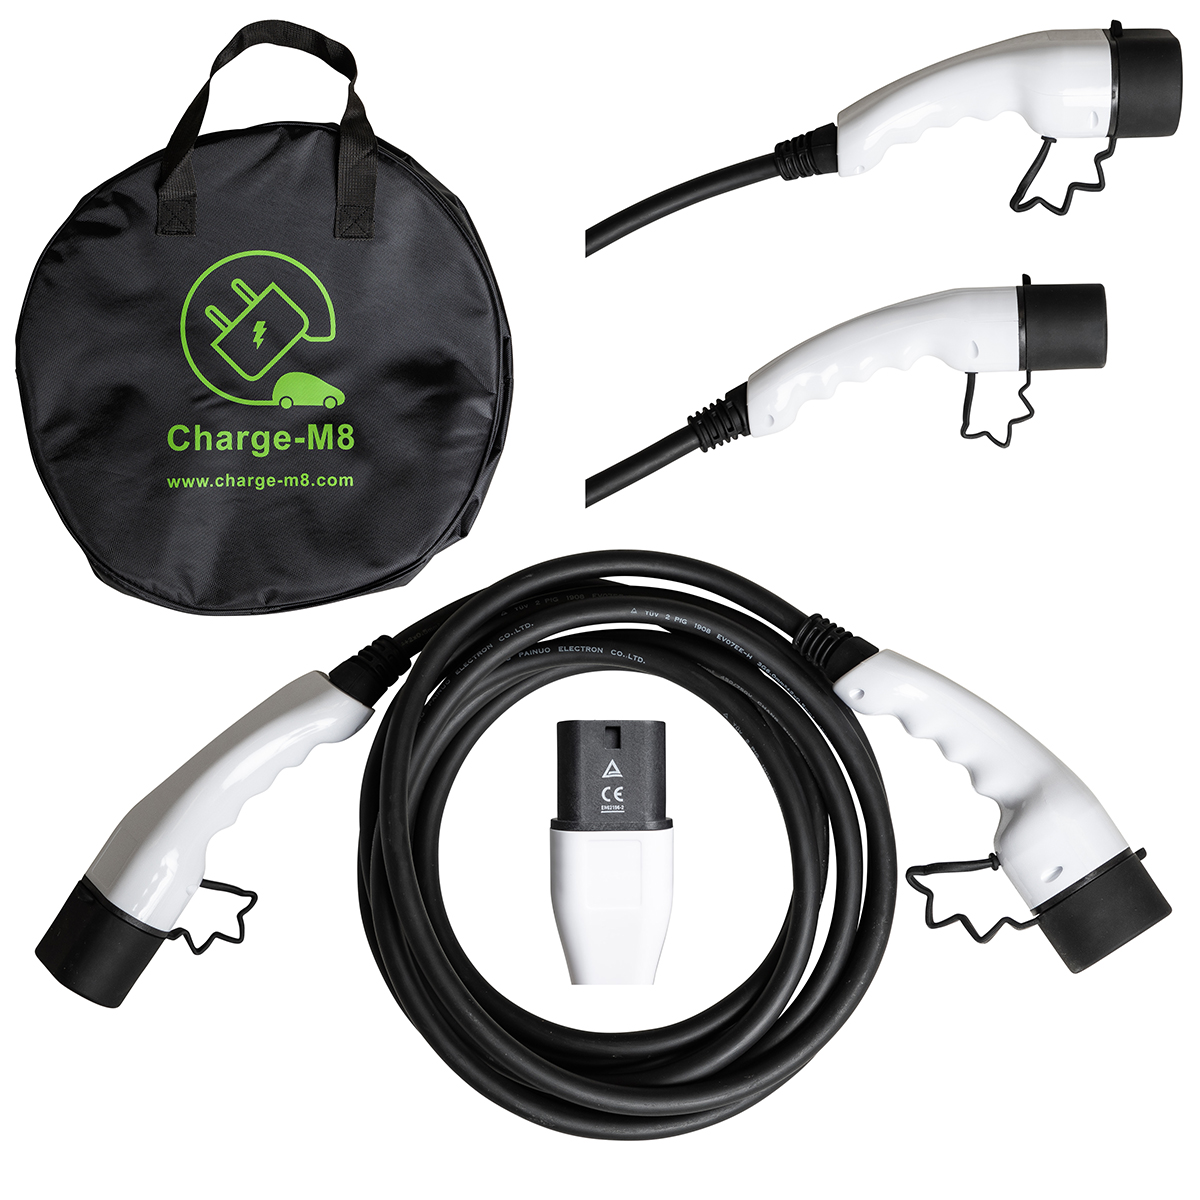 Charge-m8 Type 2 EV Electric Vehicle Cable 32A 5m Single Phase with Cable Bag